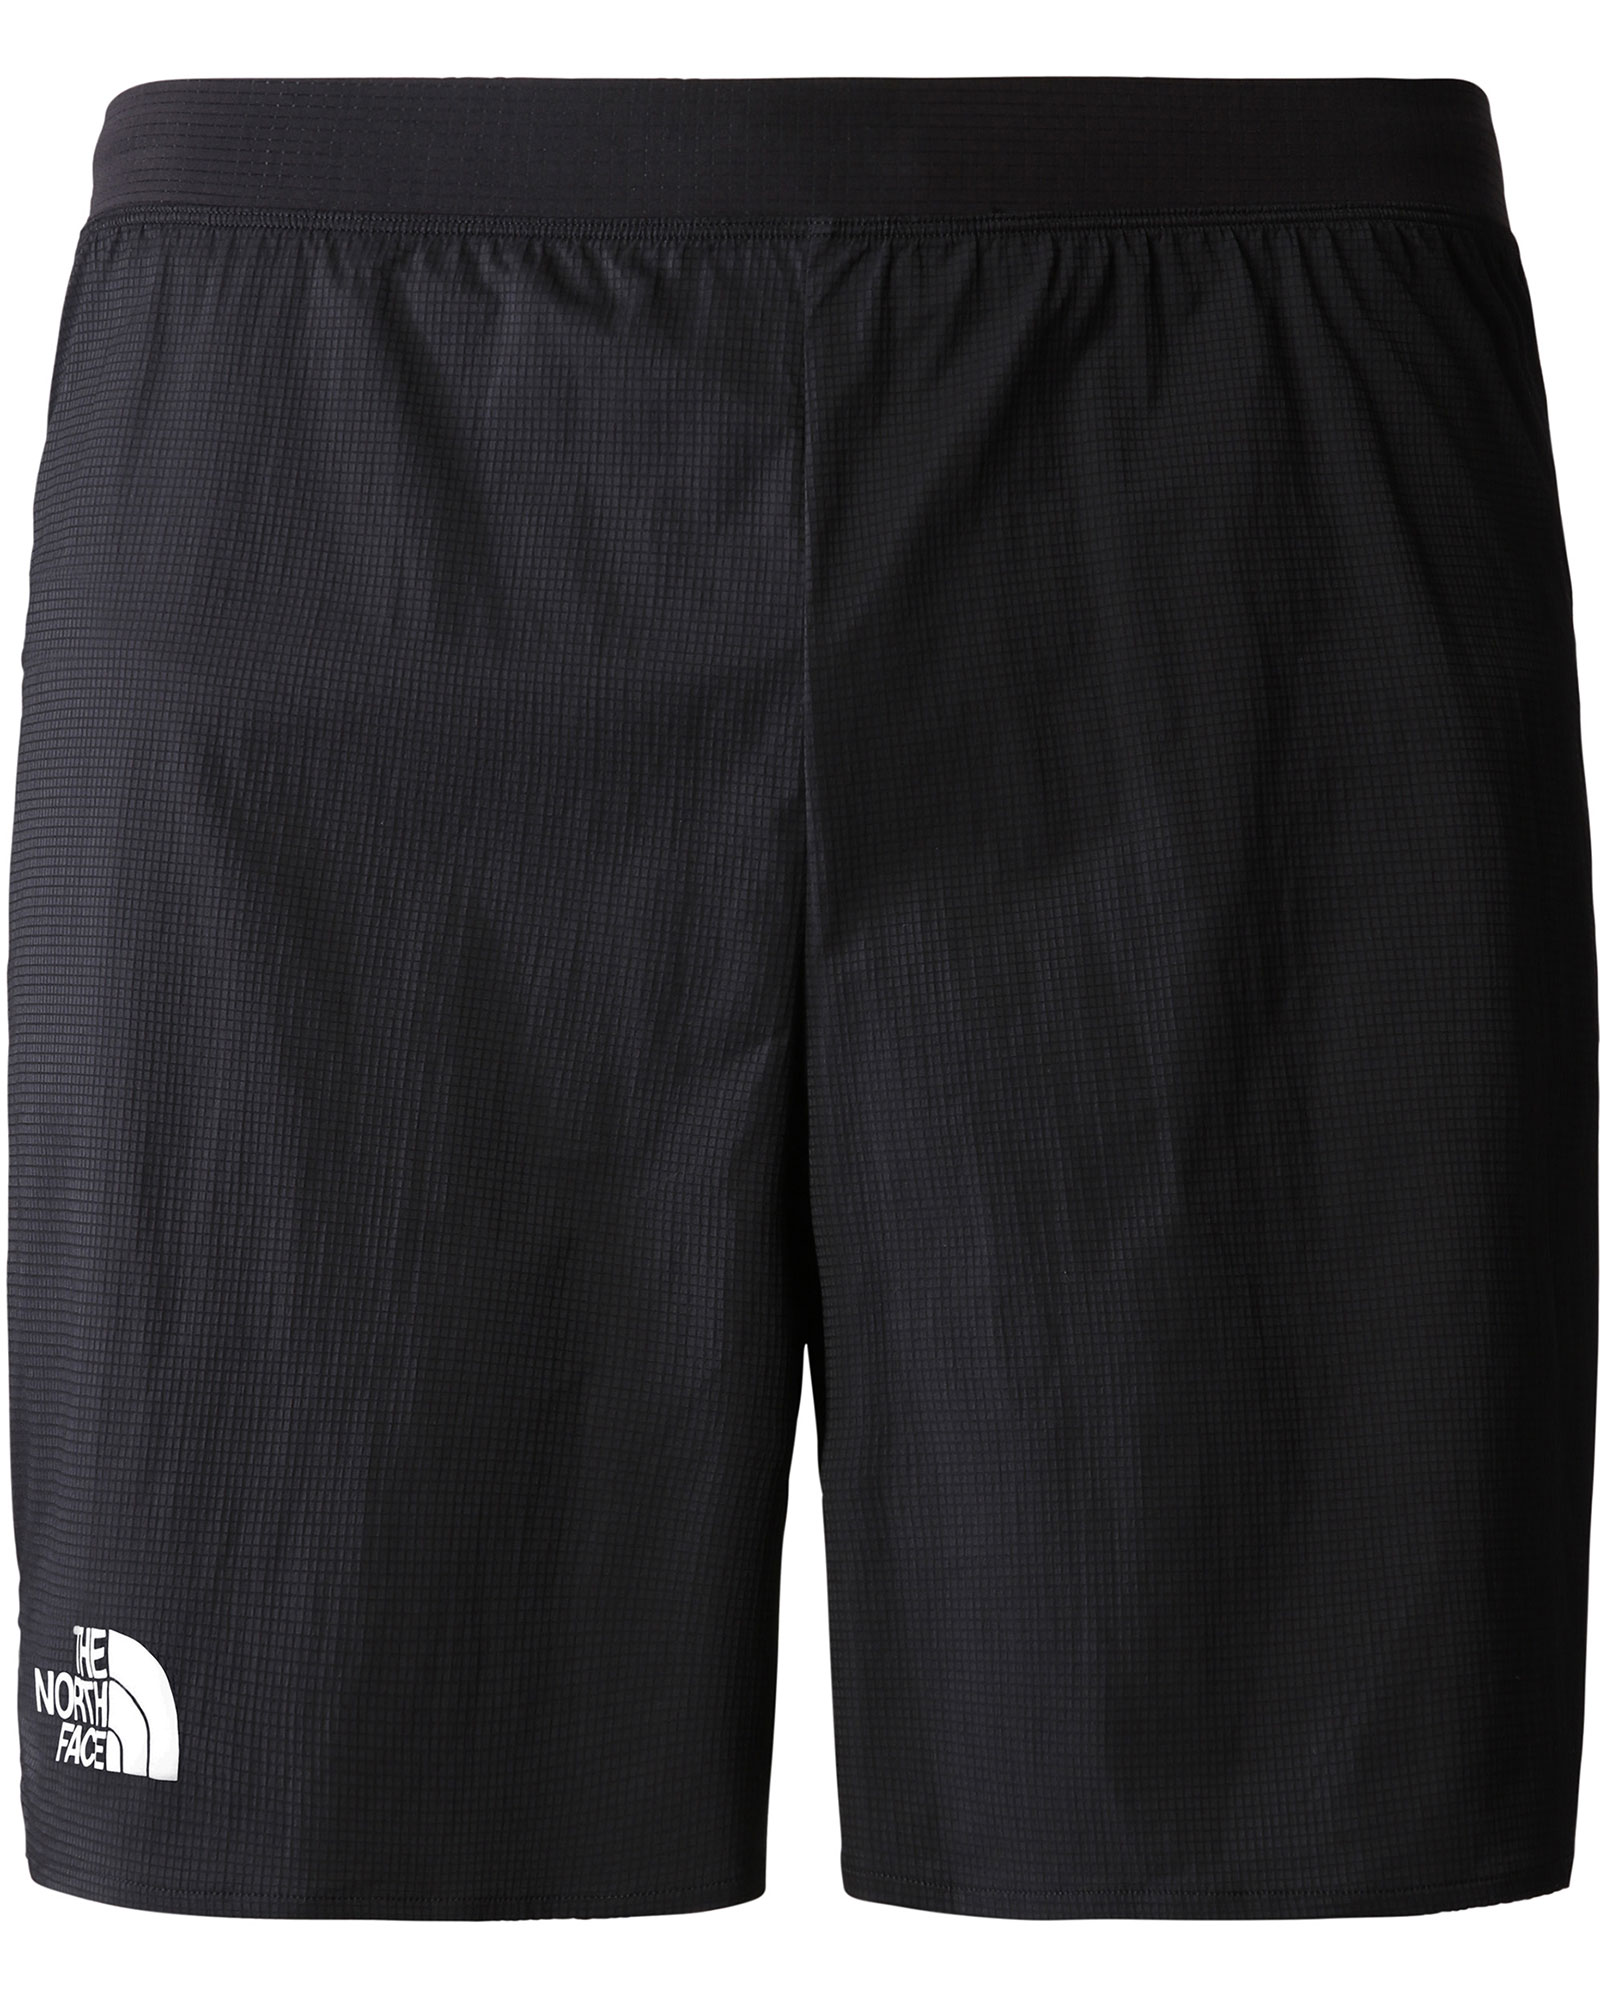 The North Face Mens Summit Pacesetter Run Brief Shorts